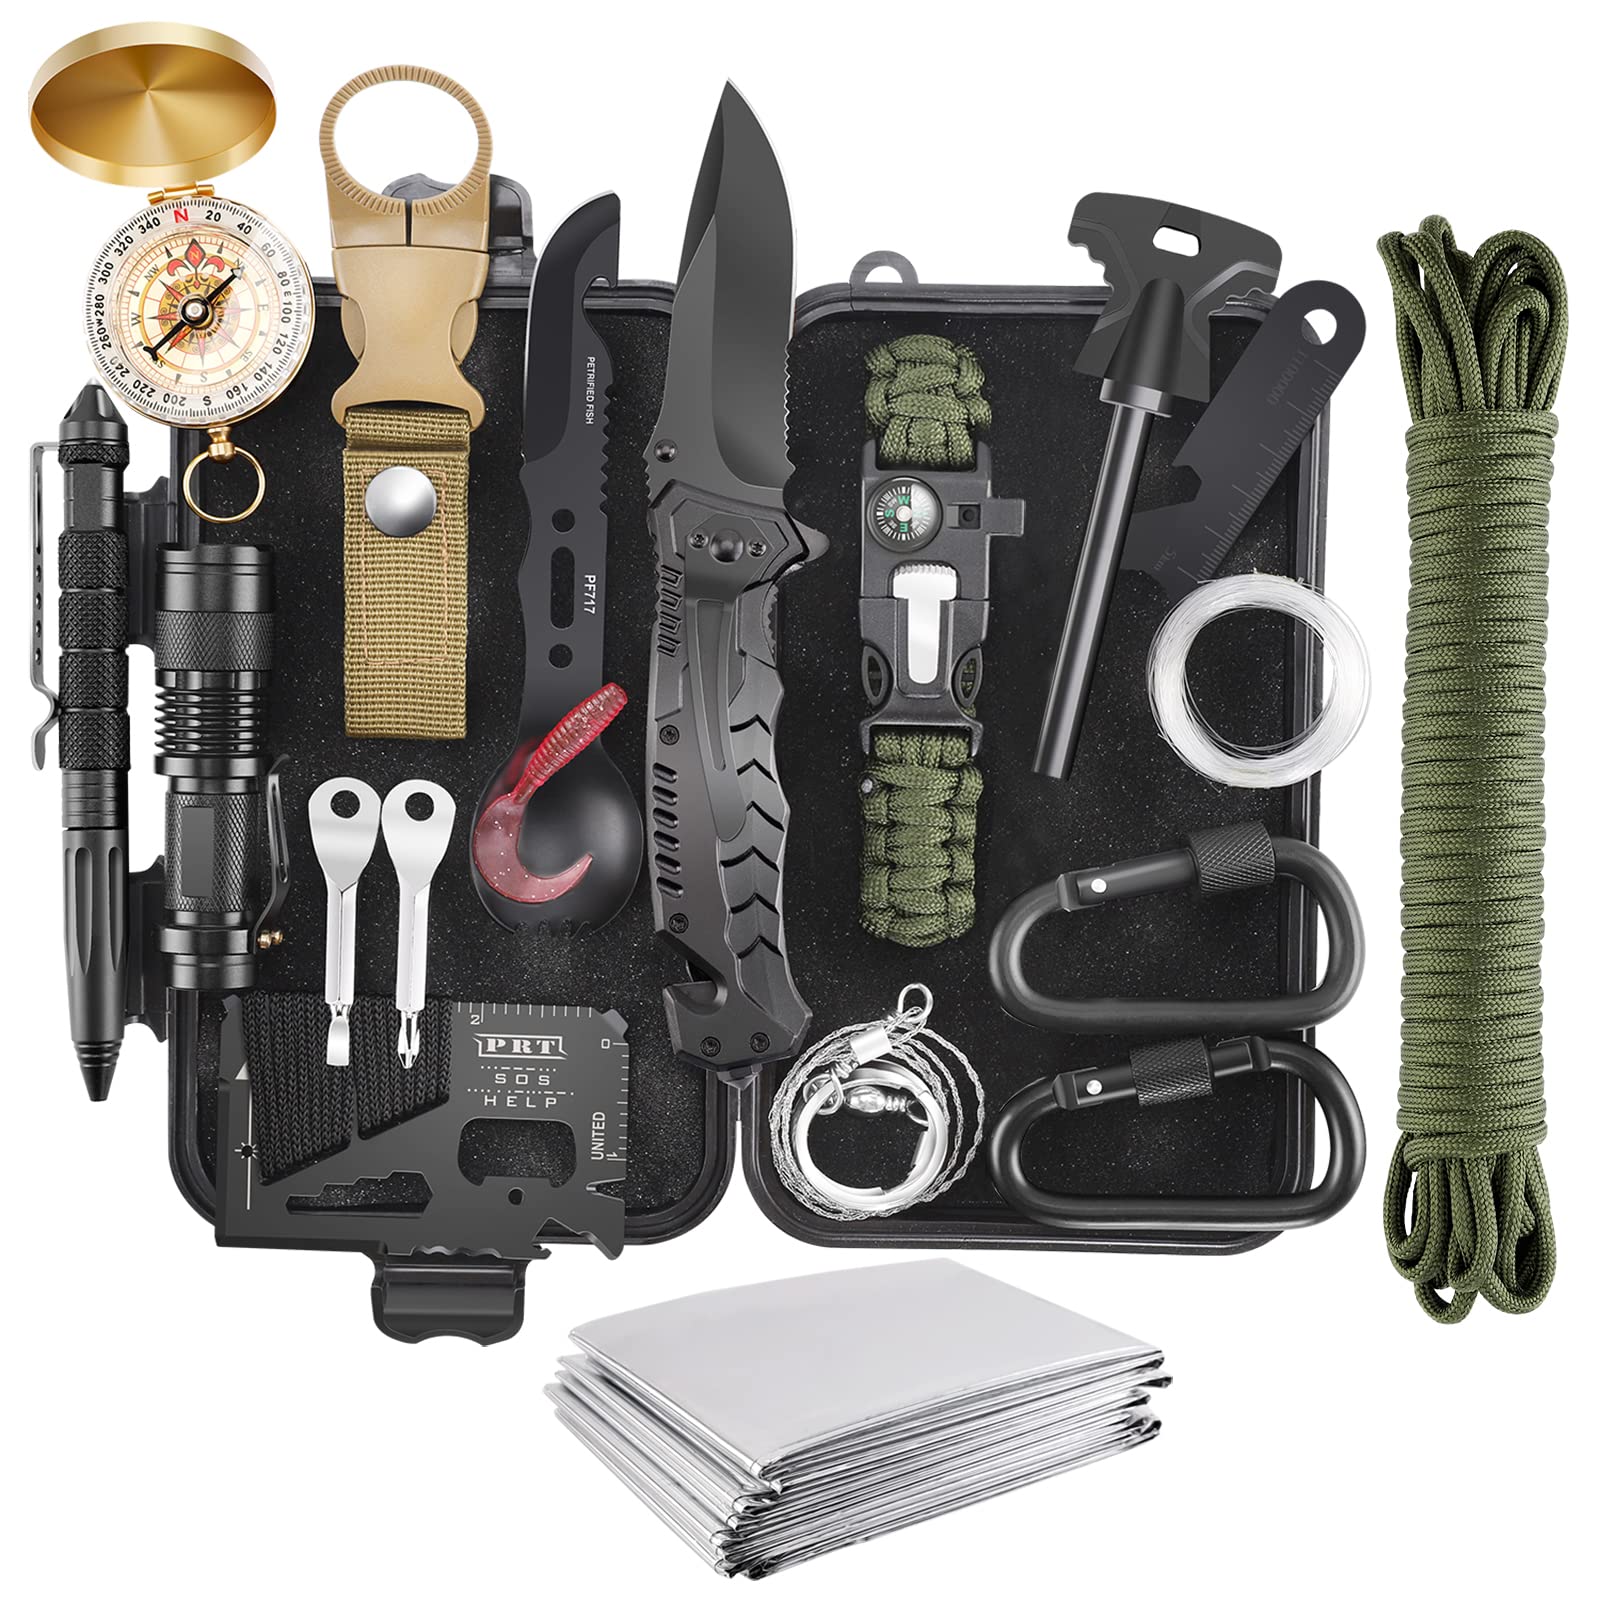 Emergency Survival Kit, 22 in 1 Professional Survival Gear Equipment Tools  First Aid Supplies for SOS